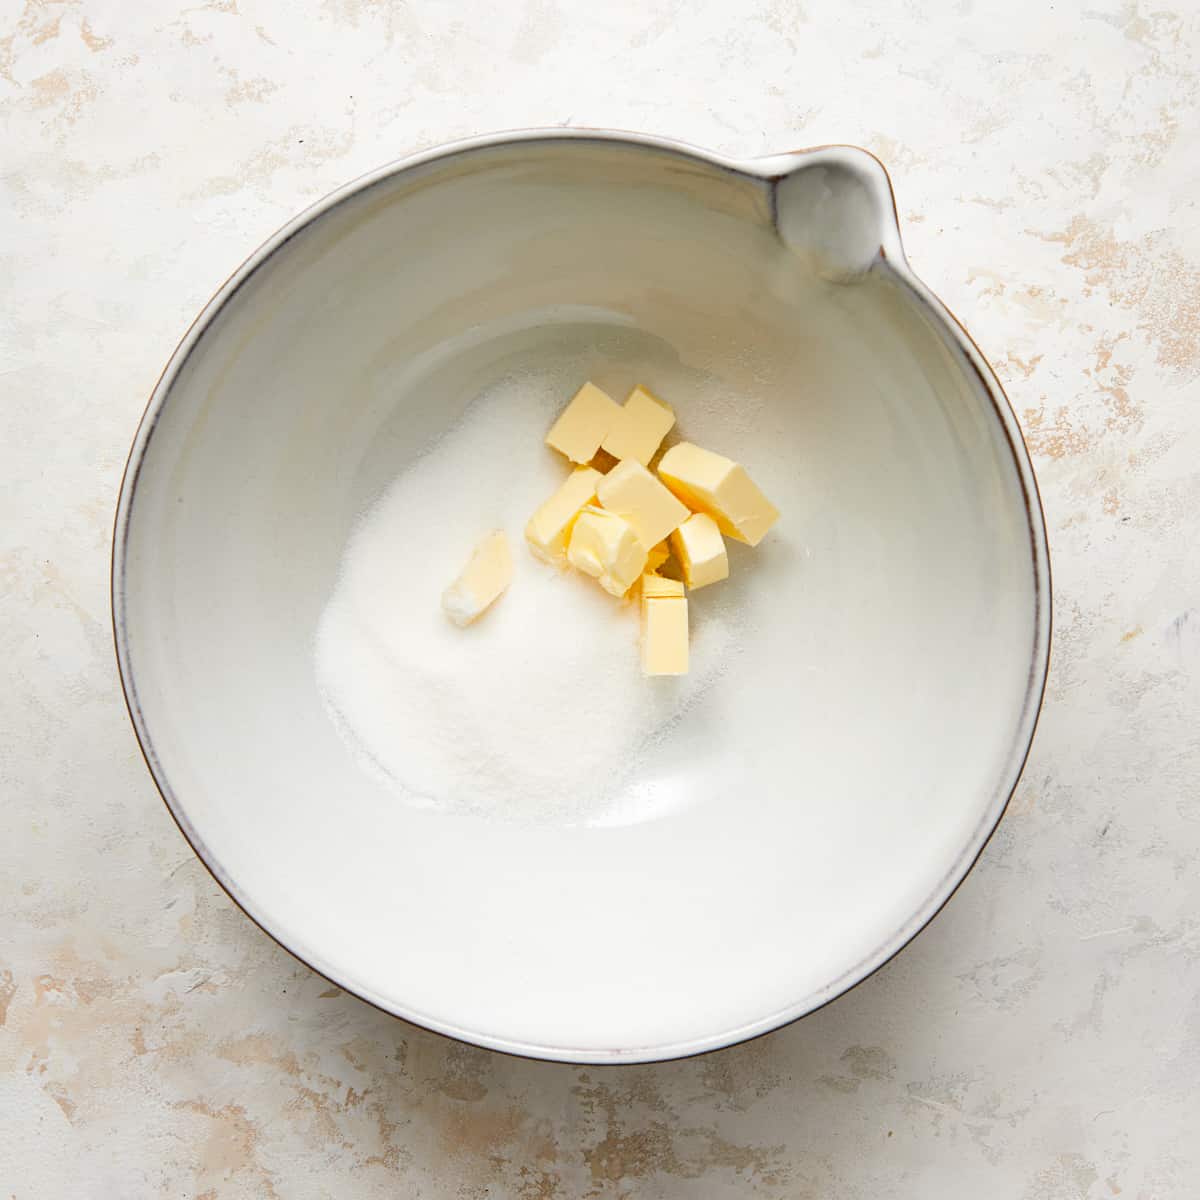 butter and sugar in a bowl.